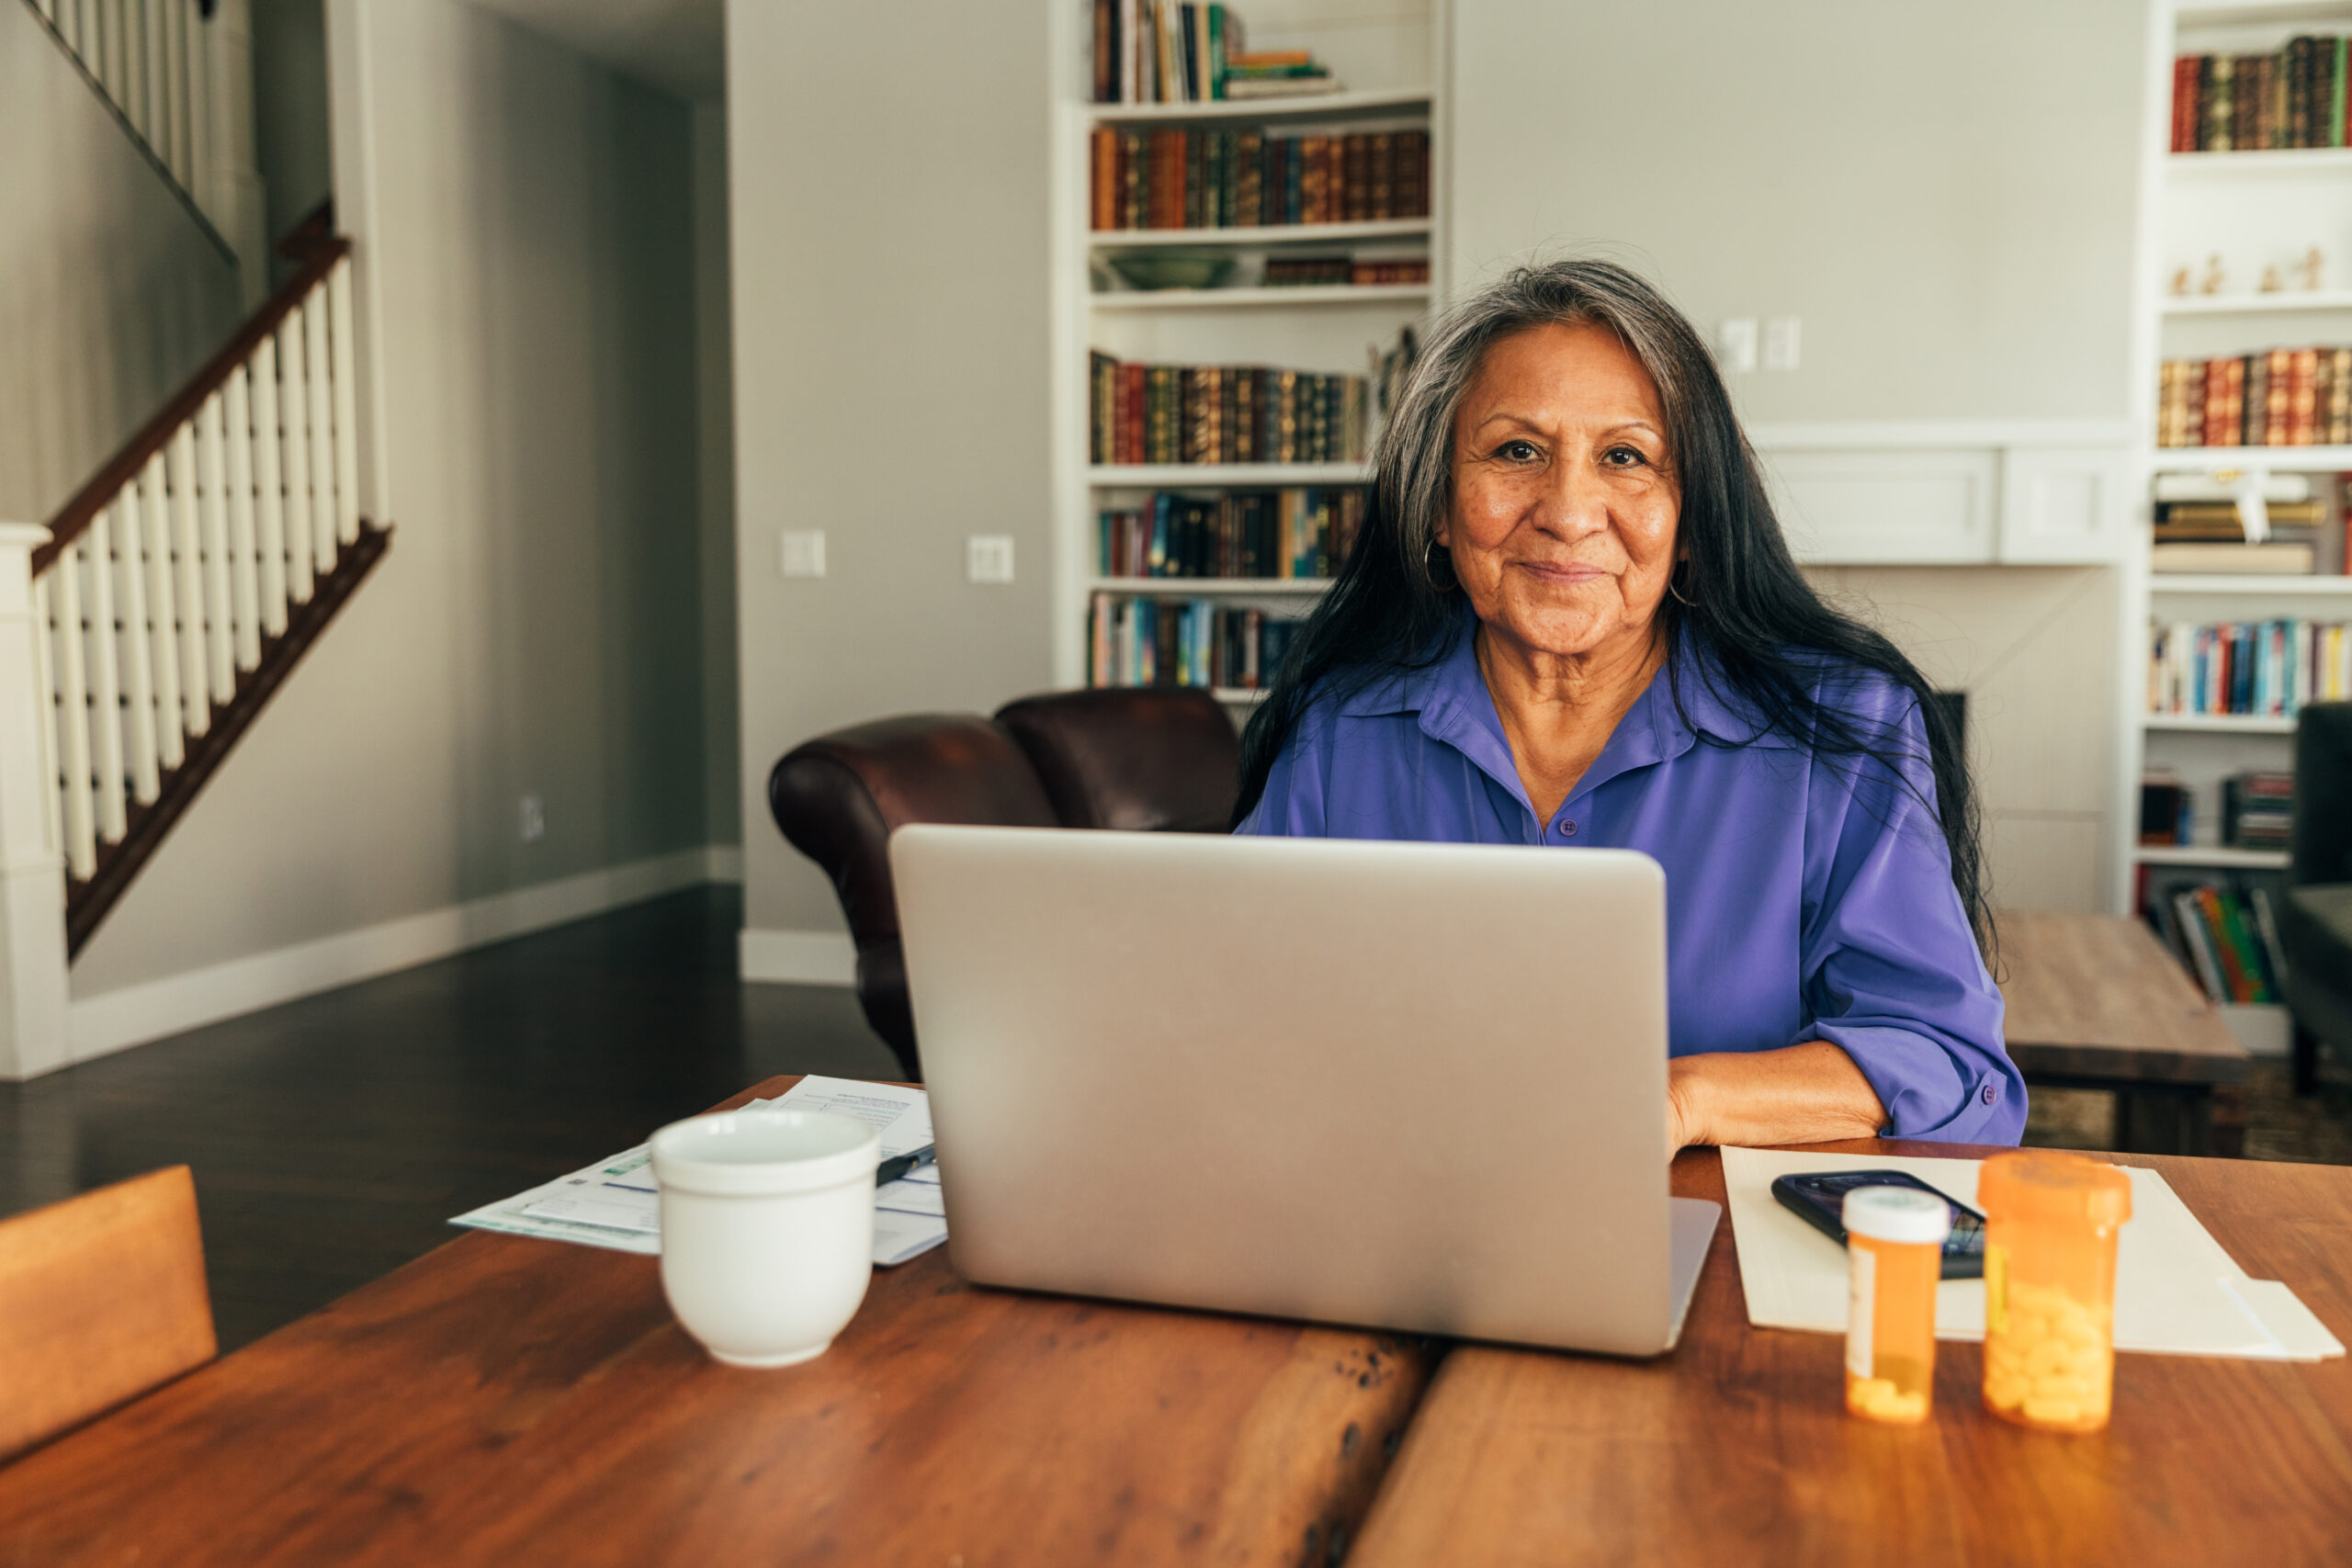 A senior Indigenous woman sits at her kitchen table while paying medical bills, talking with her doctor, and updating medicine prescriptions.